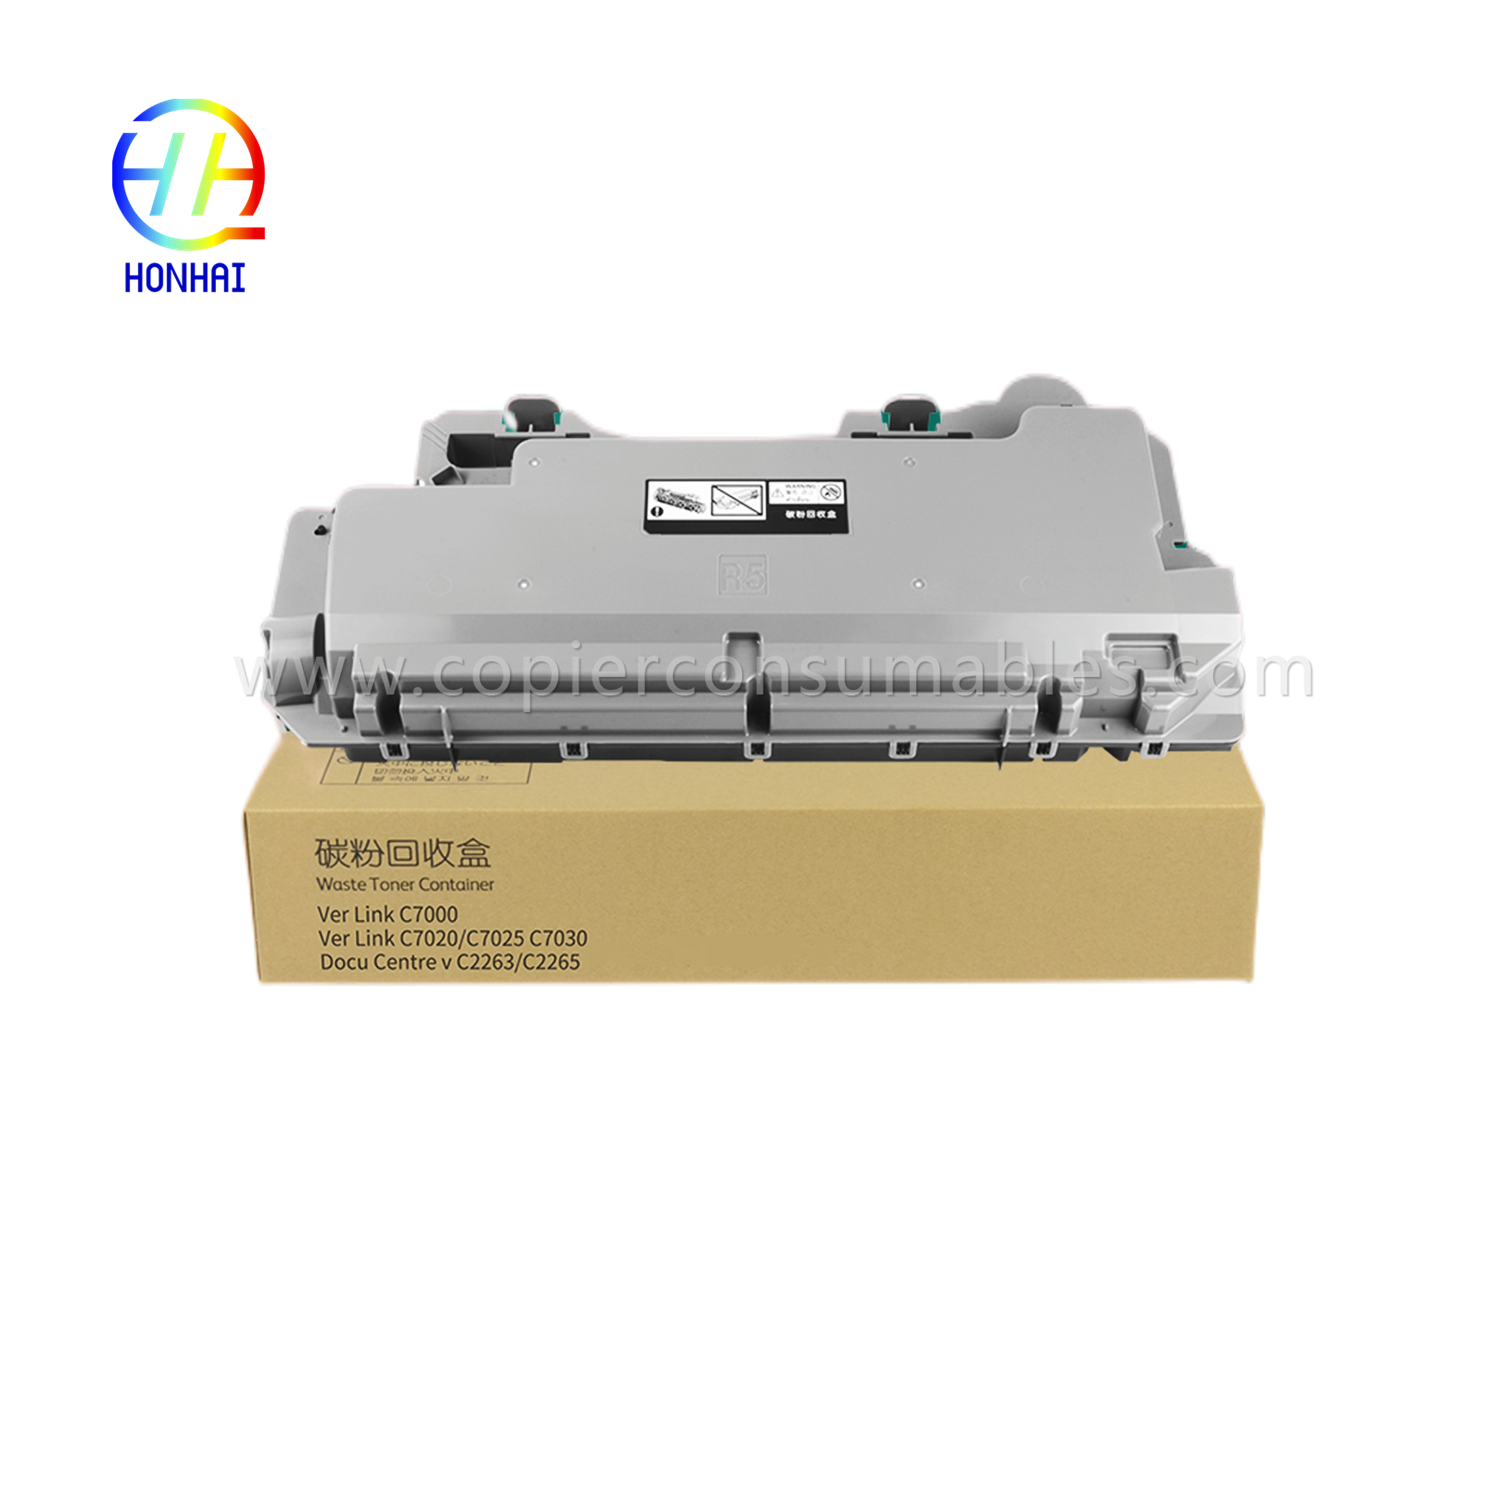 Waste Toner Container for Xerox C7020 7025 7030 7120 7125 7130 115R00128   (1)